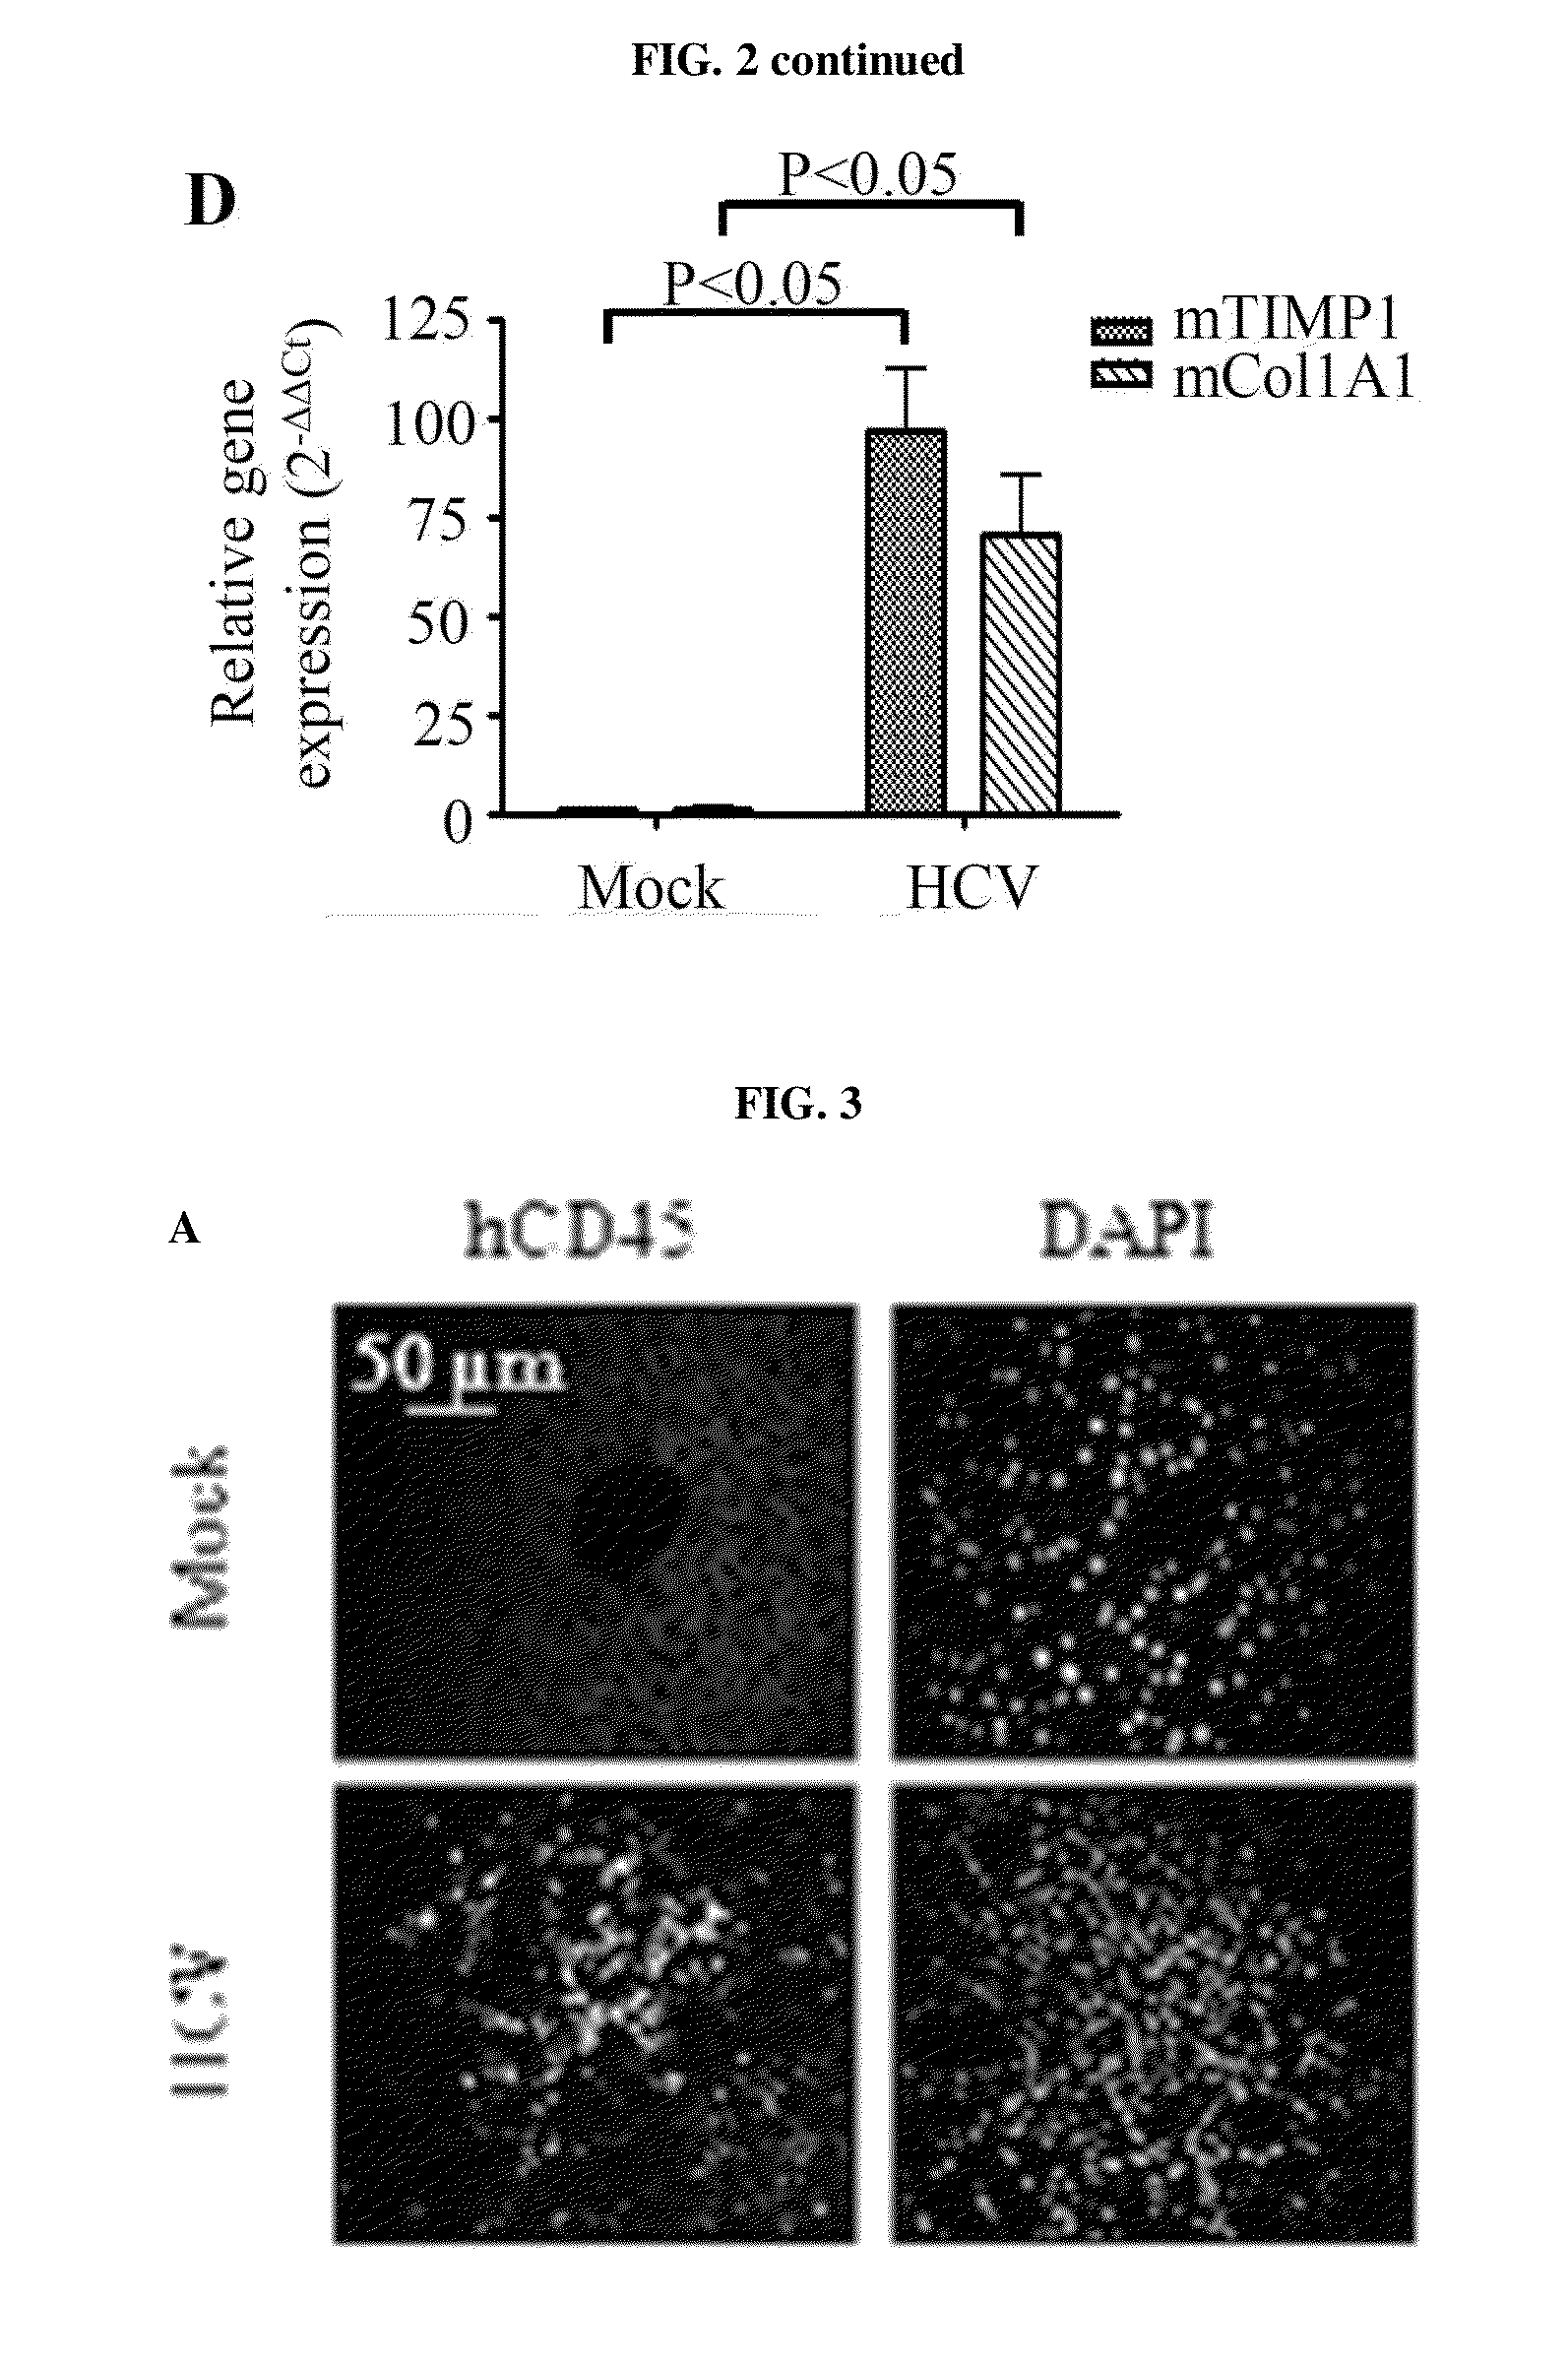 Humanized mouse model for study of bona fide hepatitis virus infection and use thereof